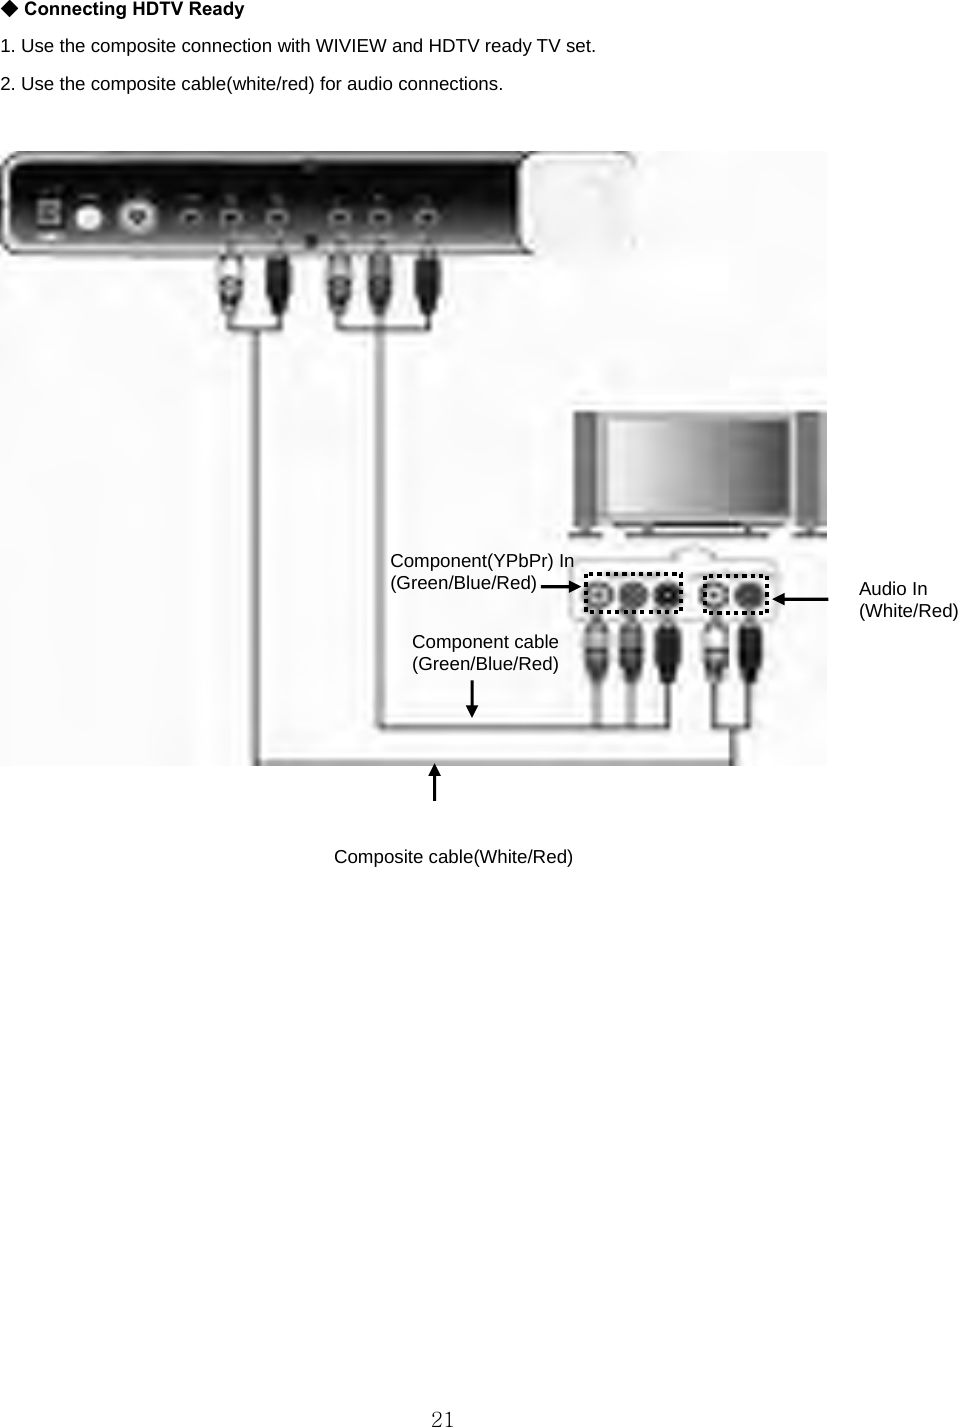 ◆ Connecting HDTV Ready 1. Use the composite connection with WIVIEW and HDTV ready TV set. 2. Use the composite cable(white/red) for audio connections.   Component(YPbPr) In (Green/Blue/Red)  Audio In (White/Red) Component cable (Green/Blue/Red)   Composite cable(White/Red)               21